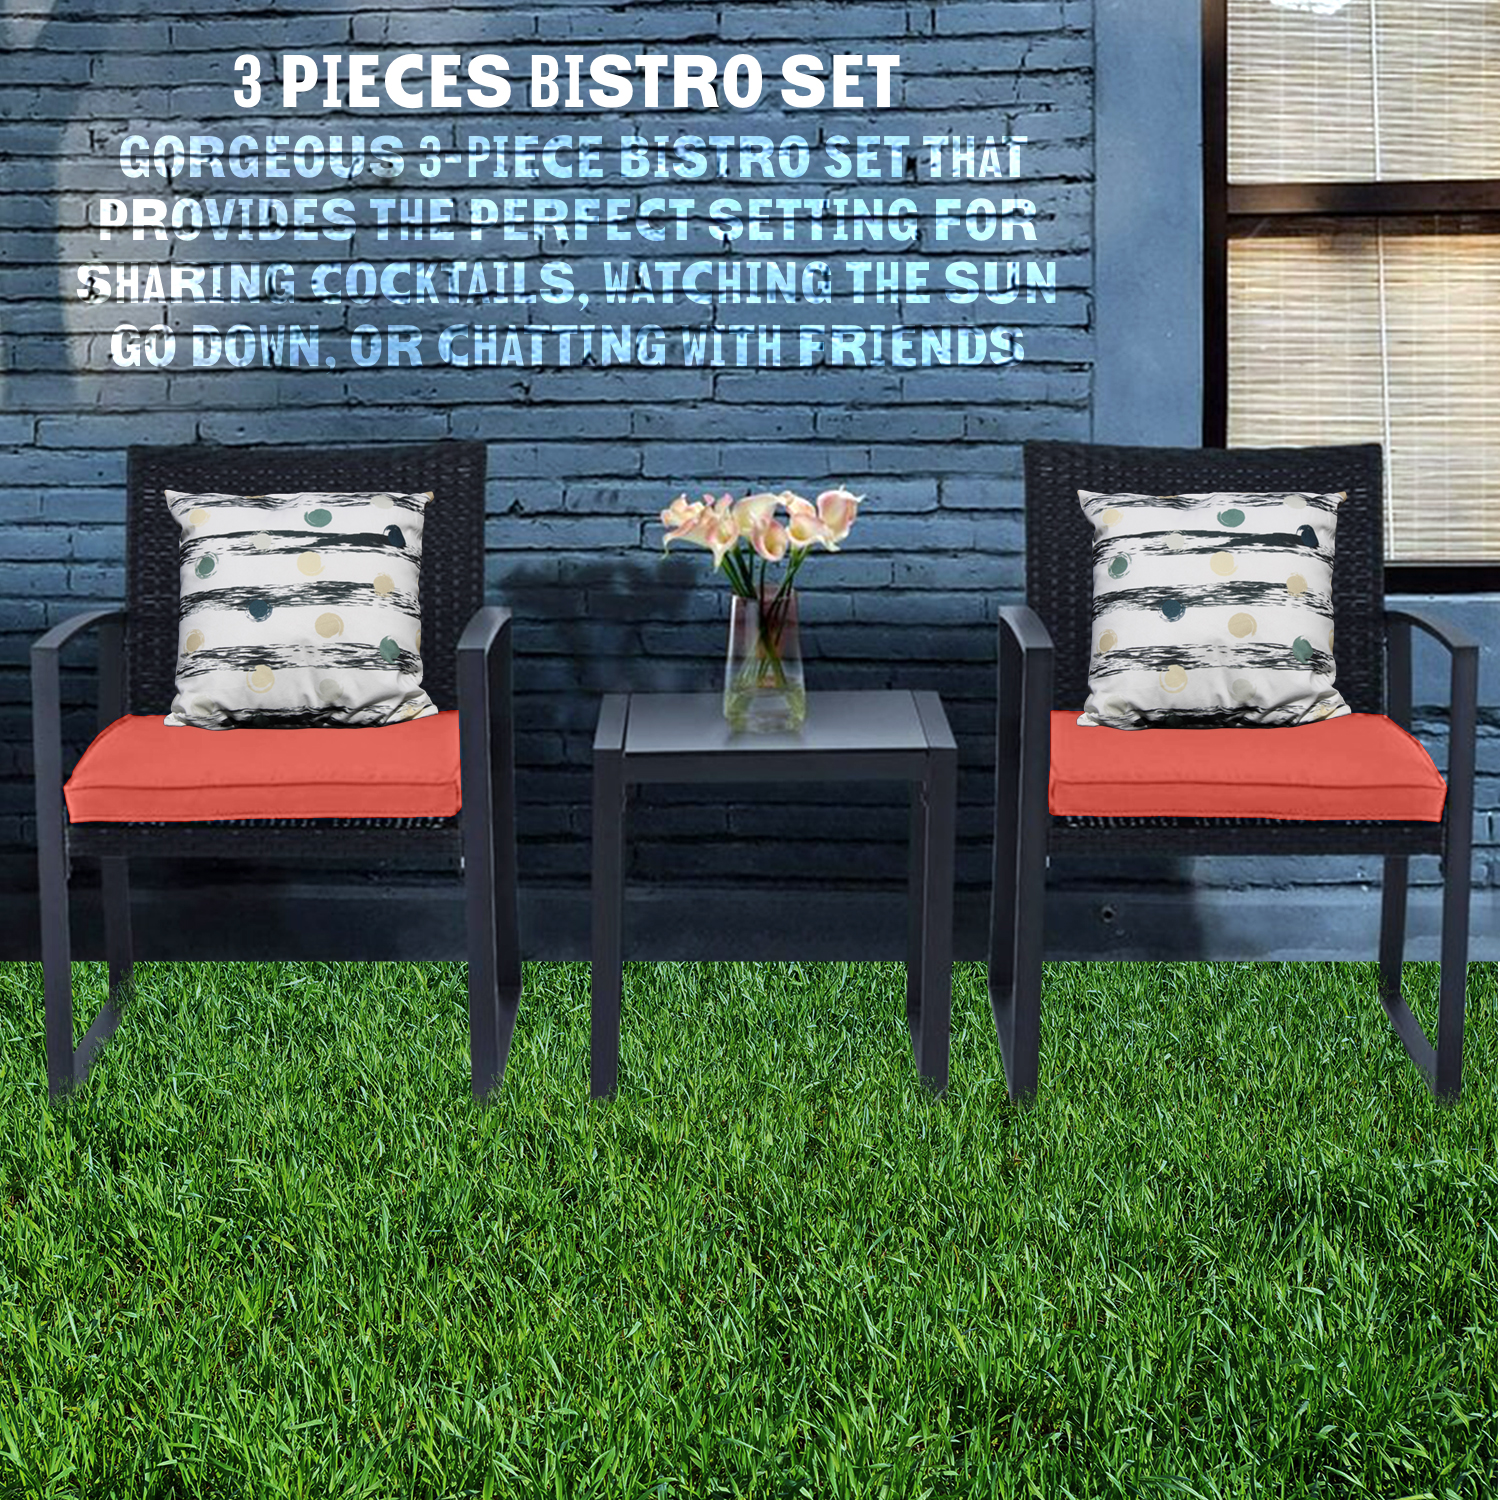 PyramidHomeDecor Black Wicker Furniture - 3 Piece Bistro Set for Outdoor Conversation - 2 Cushioned Rattan Chairs with Glass Coffee Table for Patio, Lawn, Porch, Lounge, Deck, Balcony & Living Room - image 5 of 7